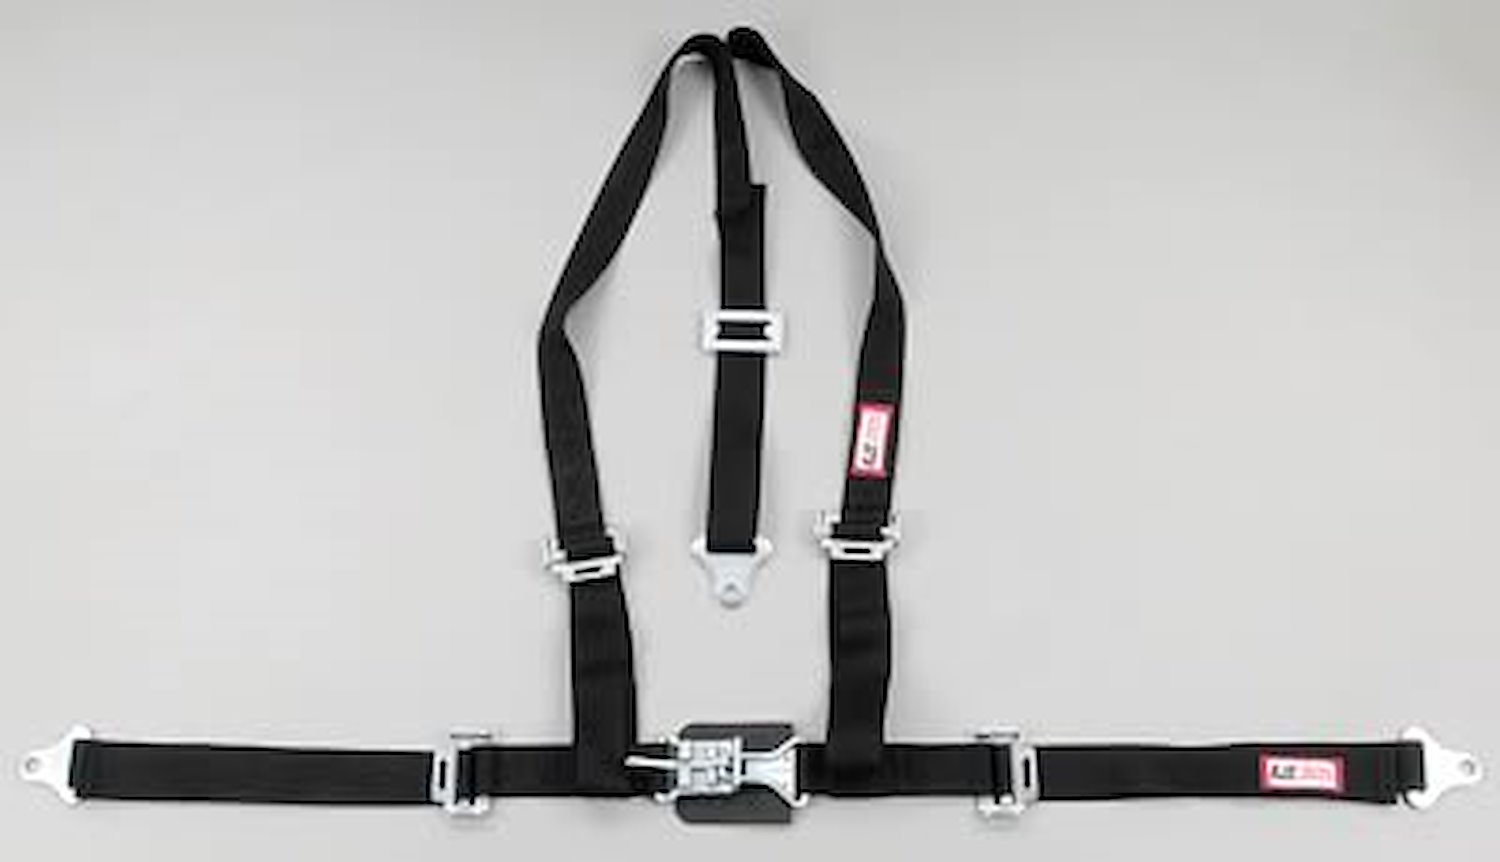 NON-SFI L&L HARNESS 2 PULL DOWN Lap Belt w/adjuster 2 S.H. V ROLL BAR MOUNT w/STERNUM STRAP ALL SNAP ENDS GRAY